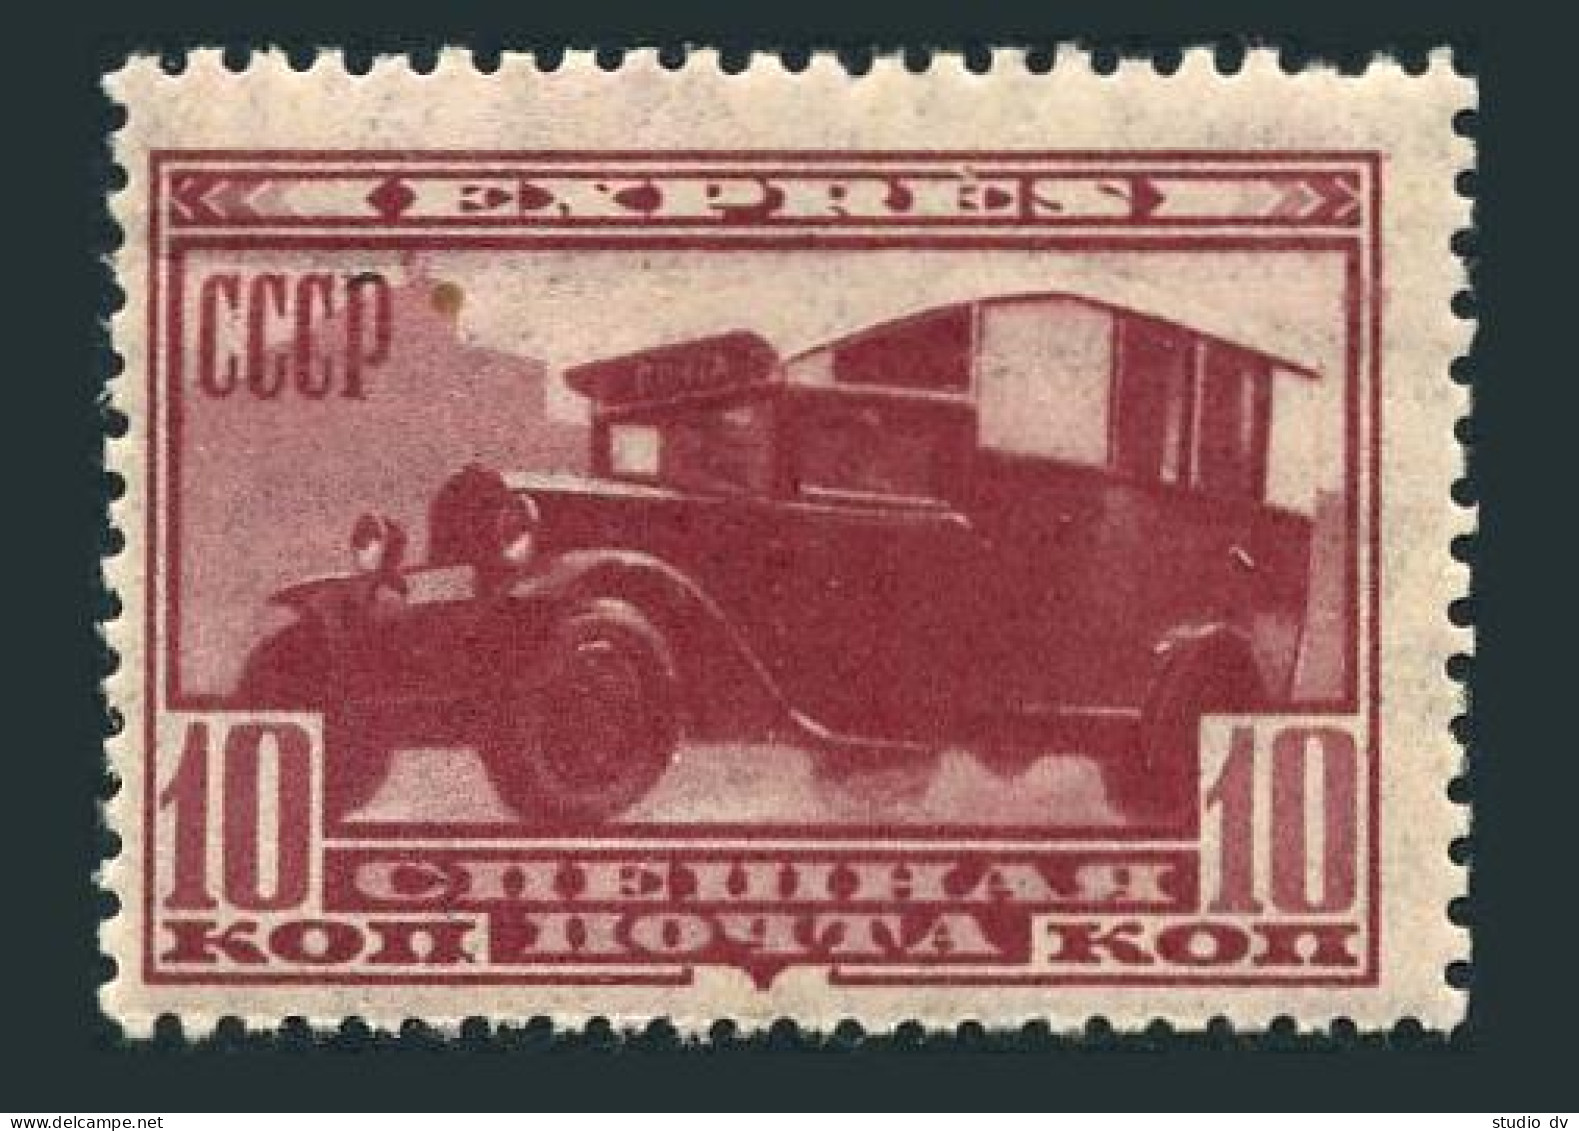 Russia E2,lightly Hinged,.Michel 408. Special Delivery,1932.Express Truck. - Unused Stamps